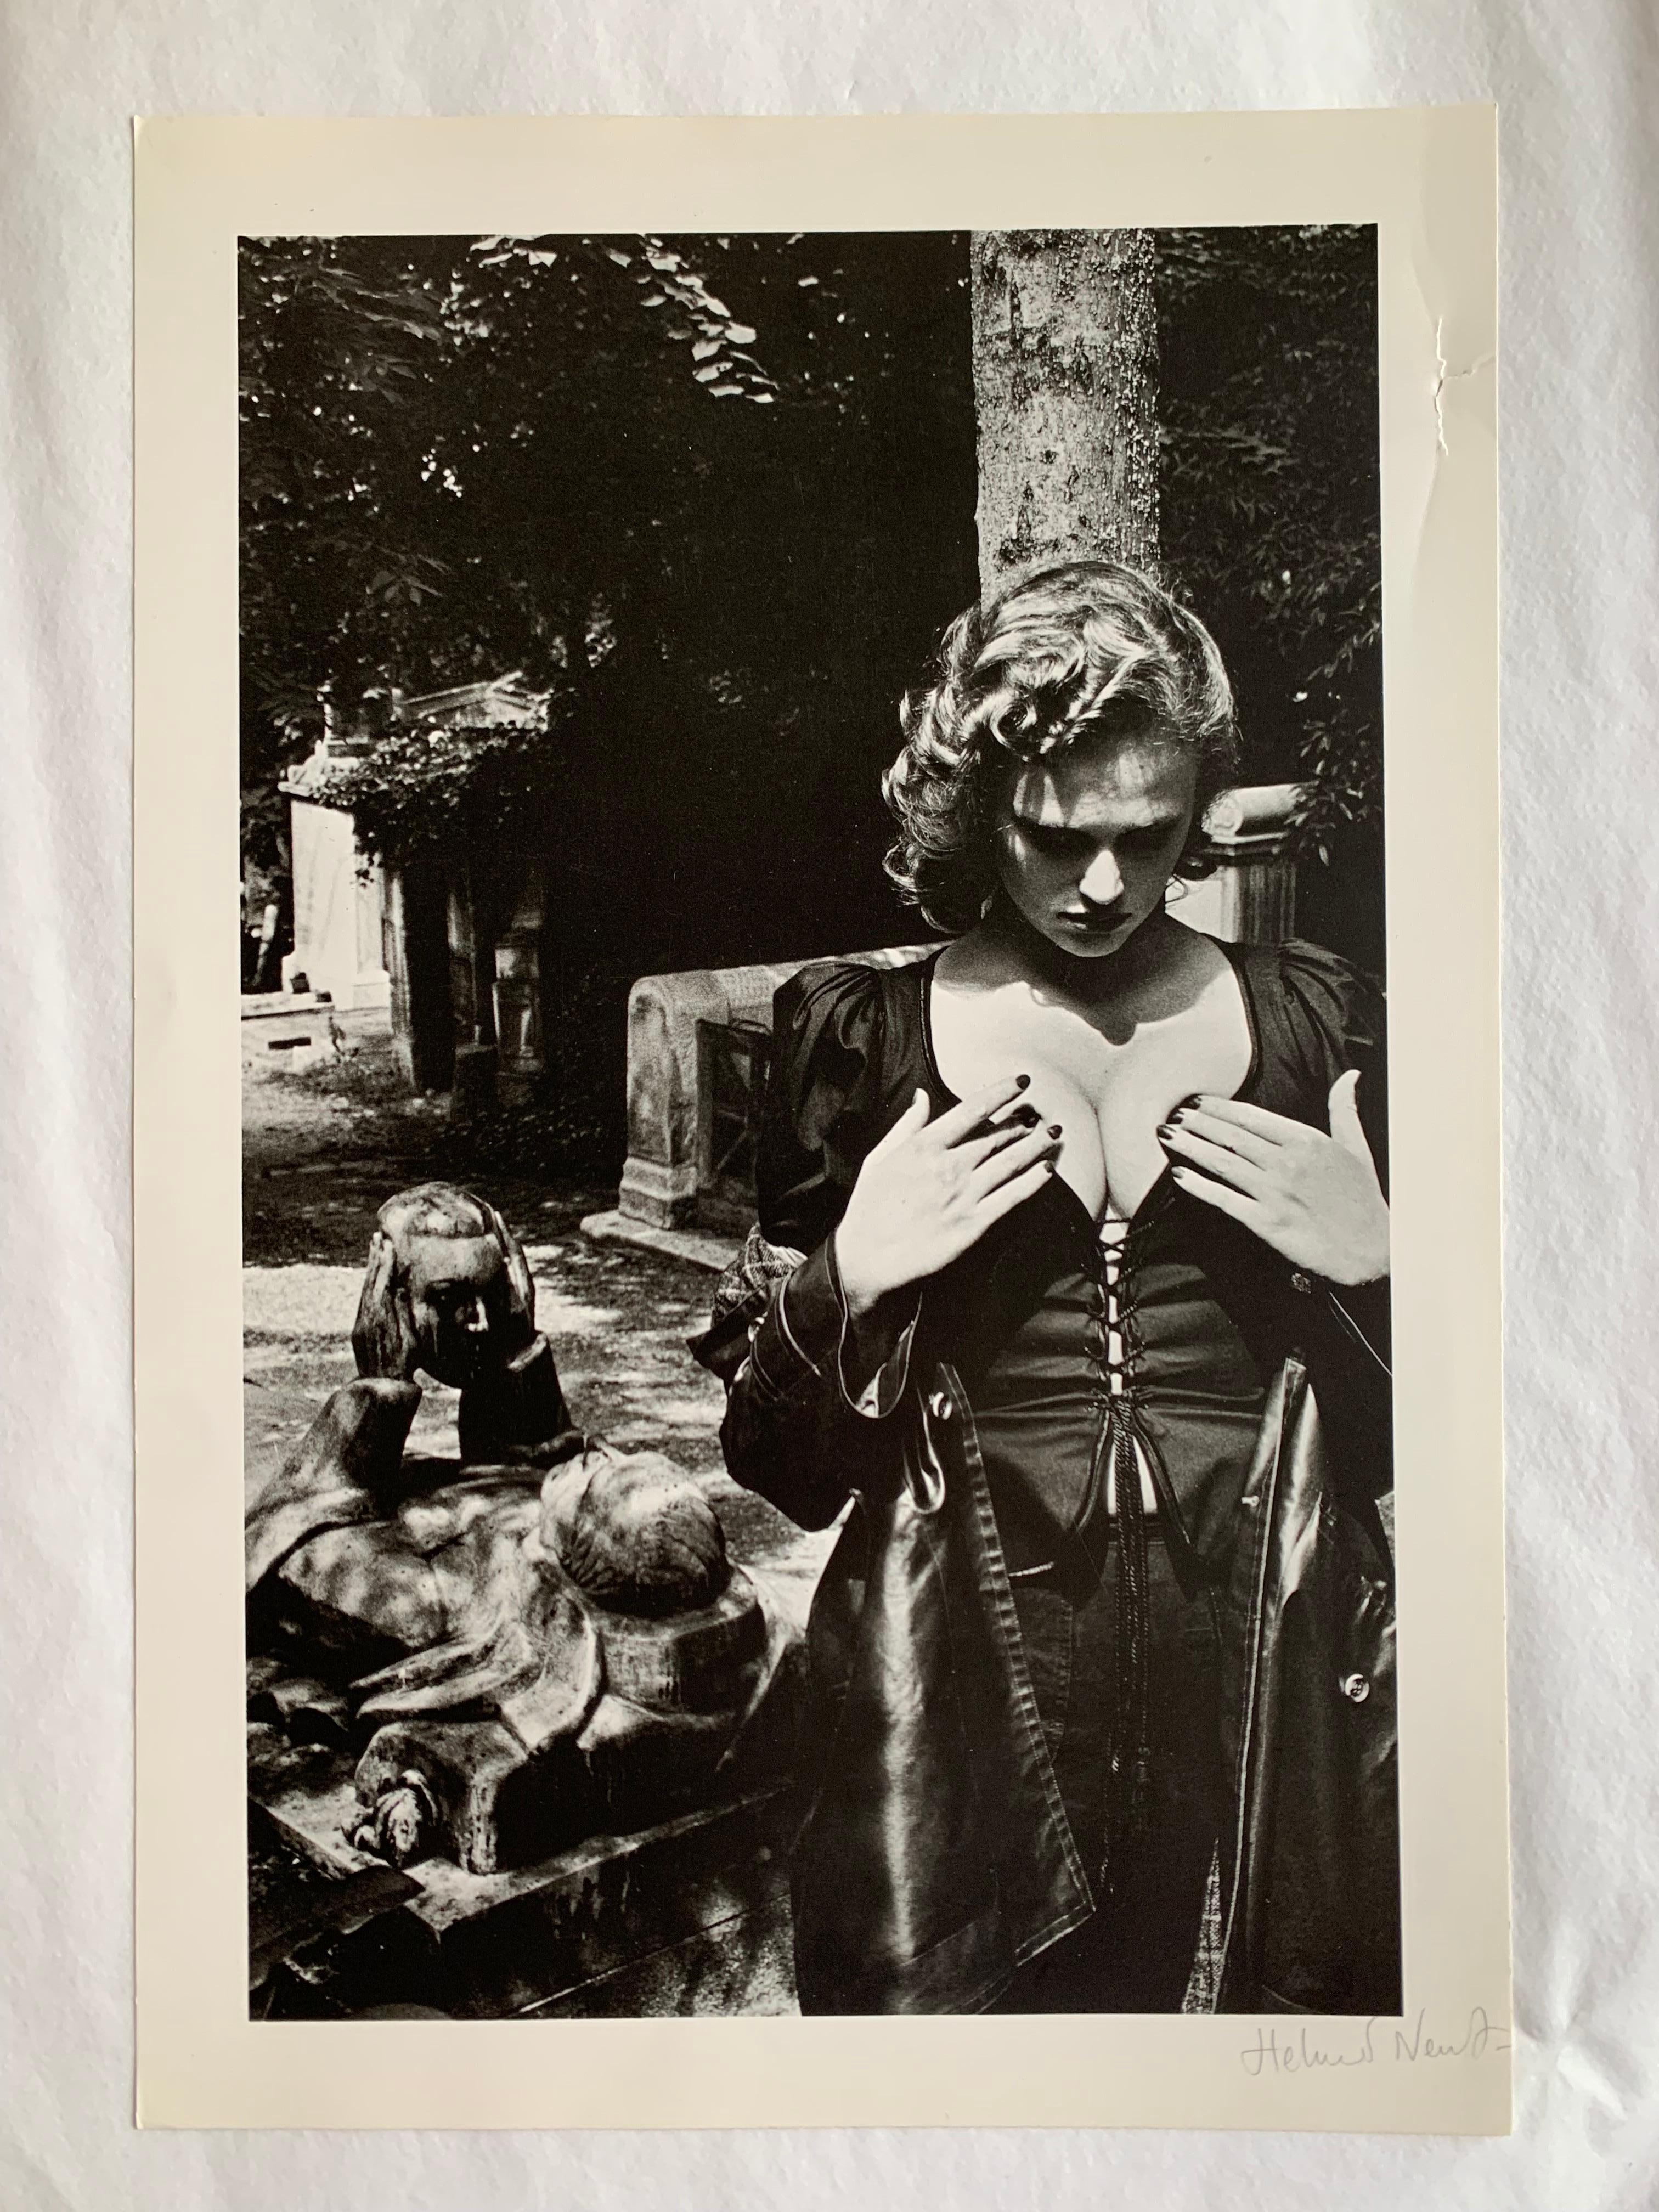 Helmut Newton - "Père Lachaise - Tomb of Talma, Paris, 1977

Photograph from 1977
Signed lower right and annotated on the back
Tear in the margin 

Paper size : 40 x 27,5
Photo size : 35 x 23